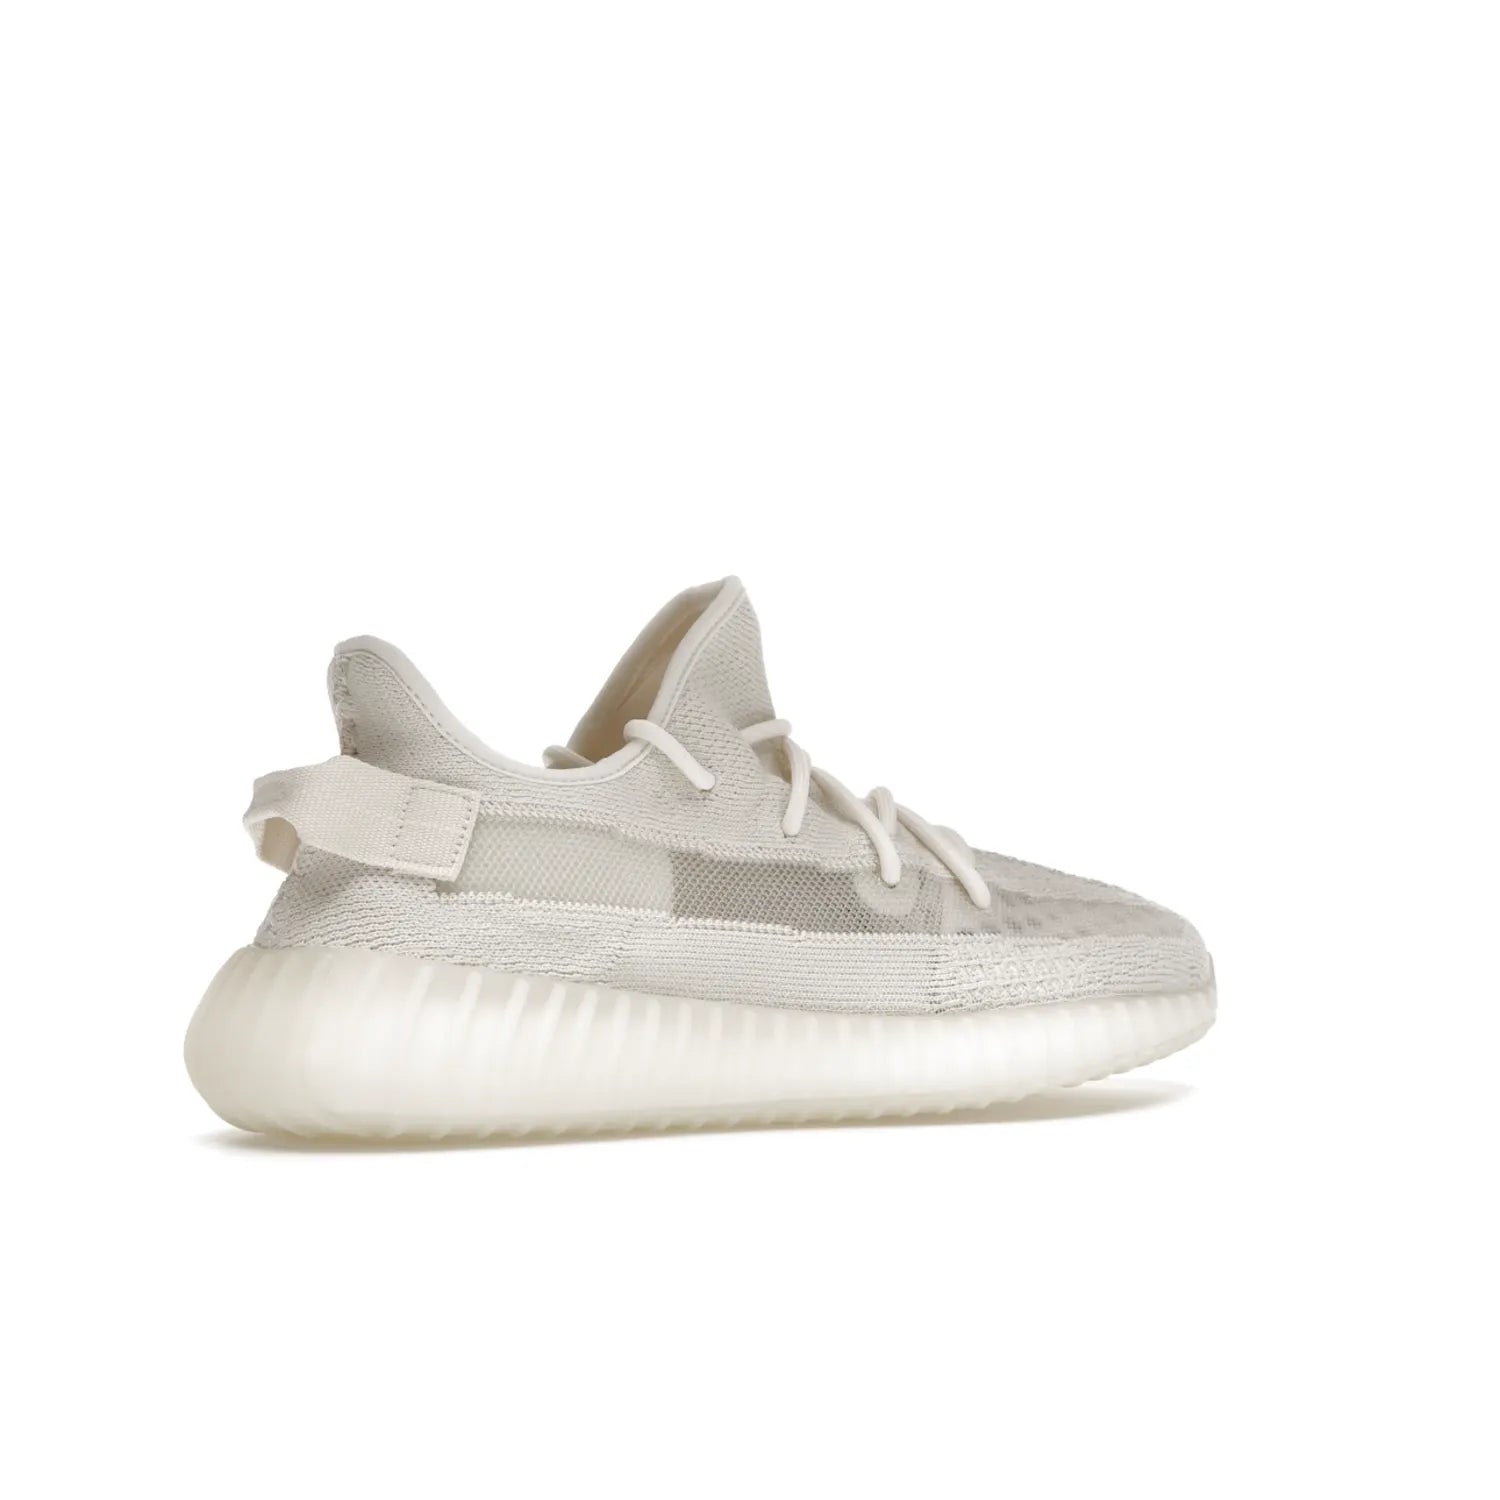 adidas Yeezy Boost 350 V2 Bone - Image 34 - Only at www.BallersClubKickz.com - Grab the stylish and comfortable adidas Yeezy Boost 350 V2 Bone in March 2022. This sneaker features a triple white Primeknit upper, mesh side stripes and canvas heel tabs, sitting atop a semi-translucent sole with Boost technology. Sure to keep your feet comfortable and stylish!